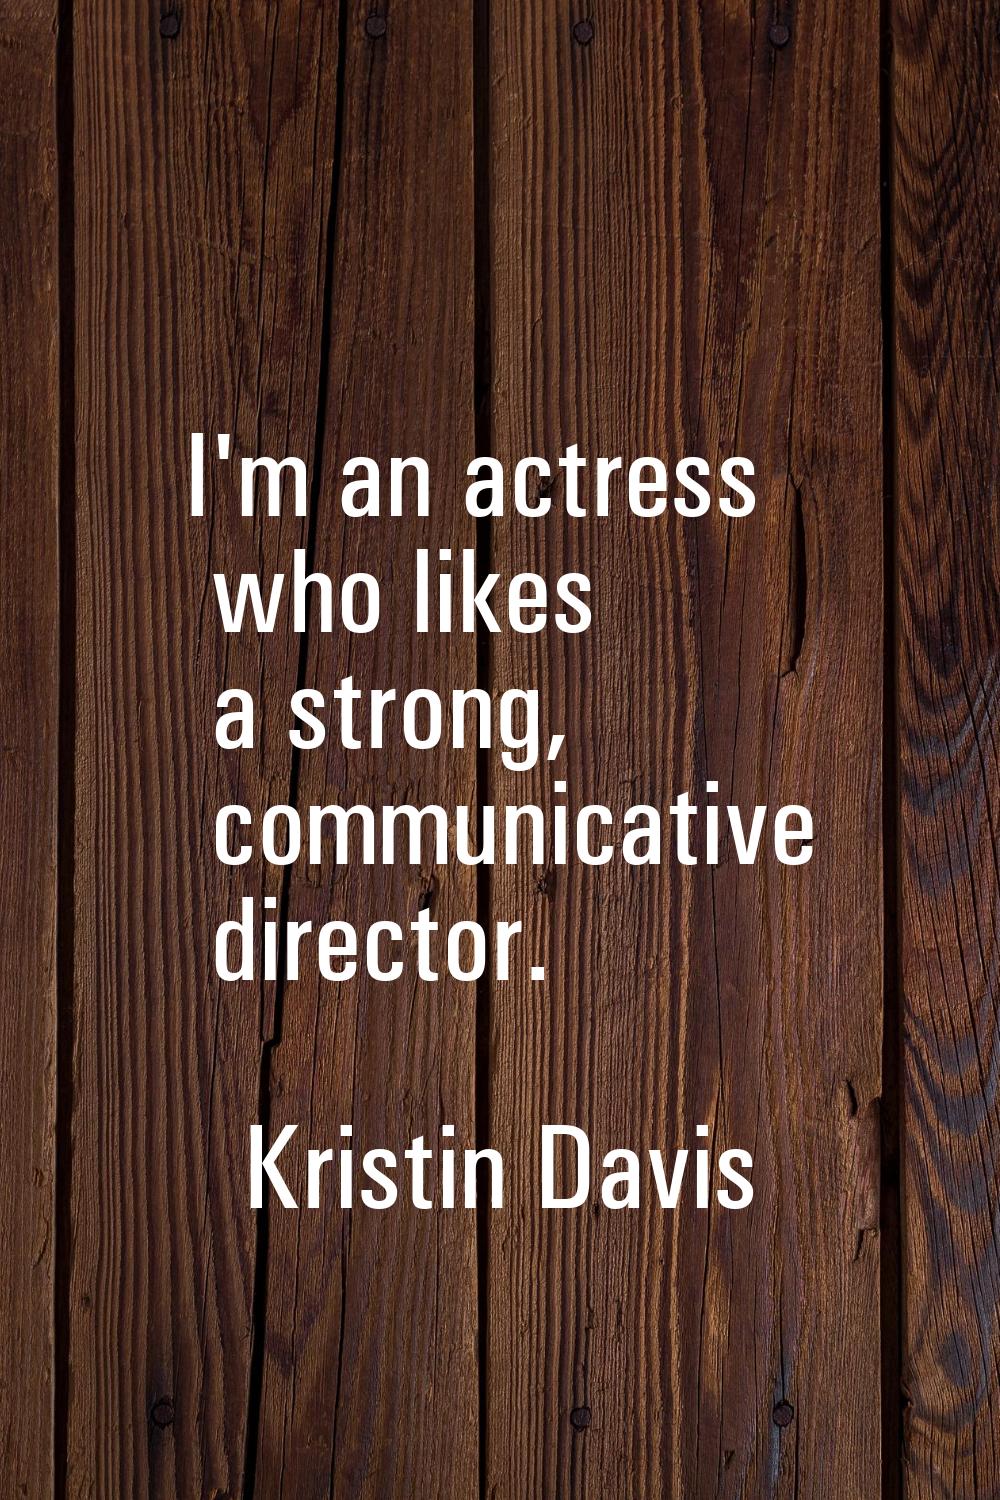 I'm an actress who likes a strong, communicative director.